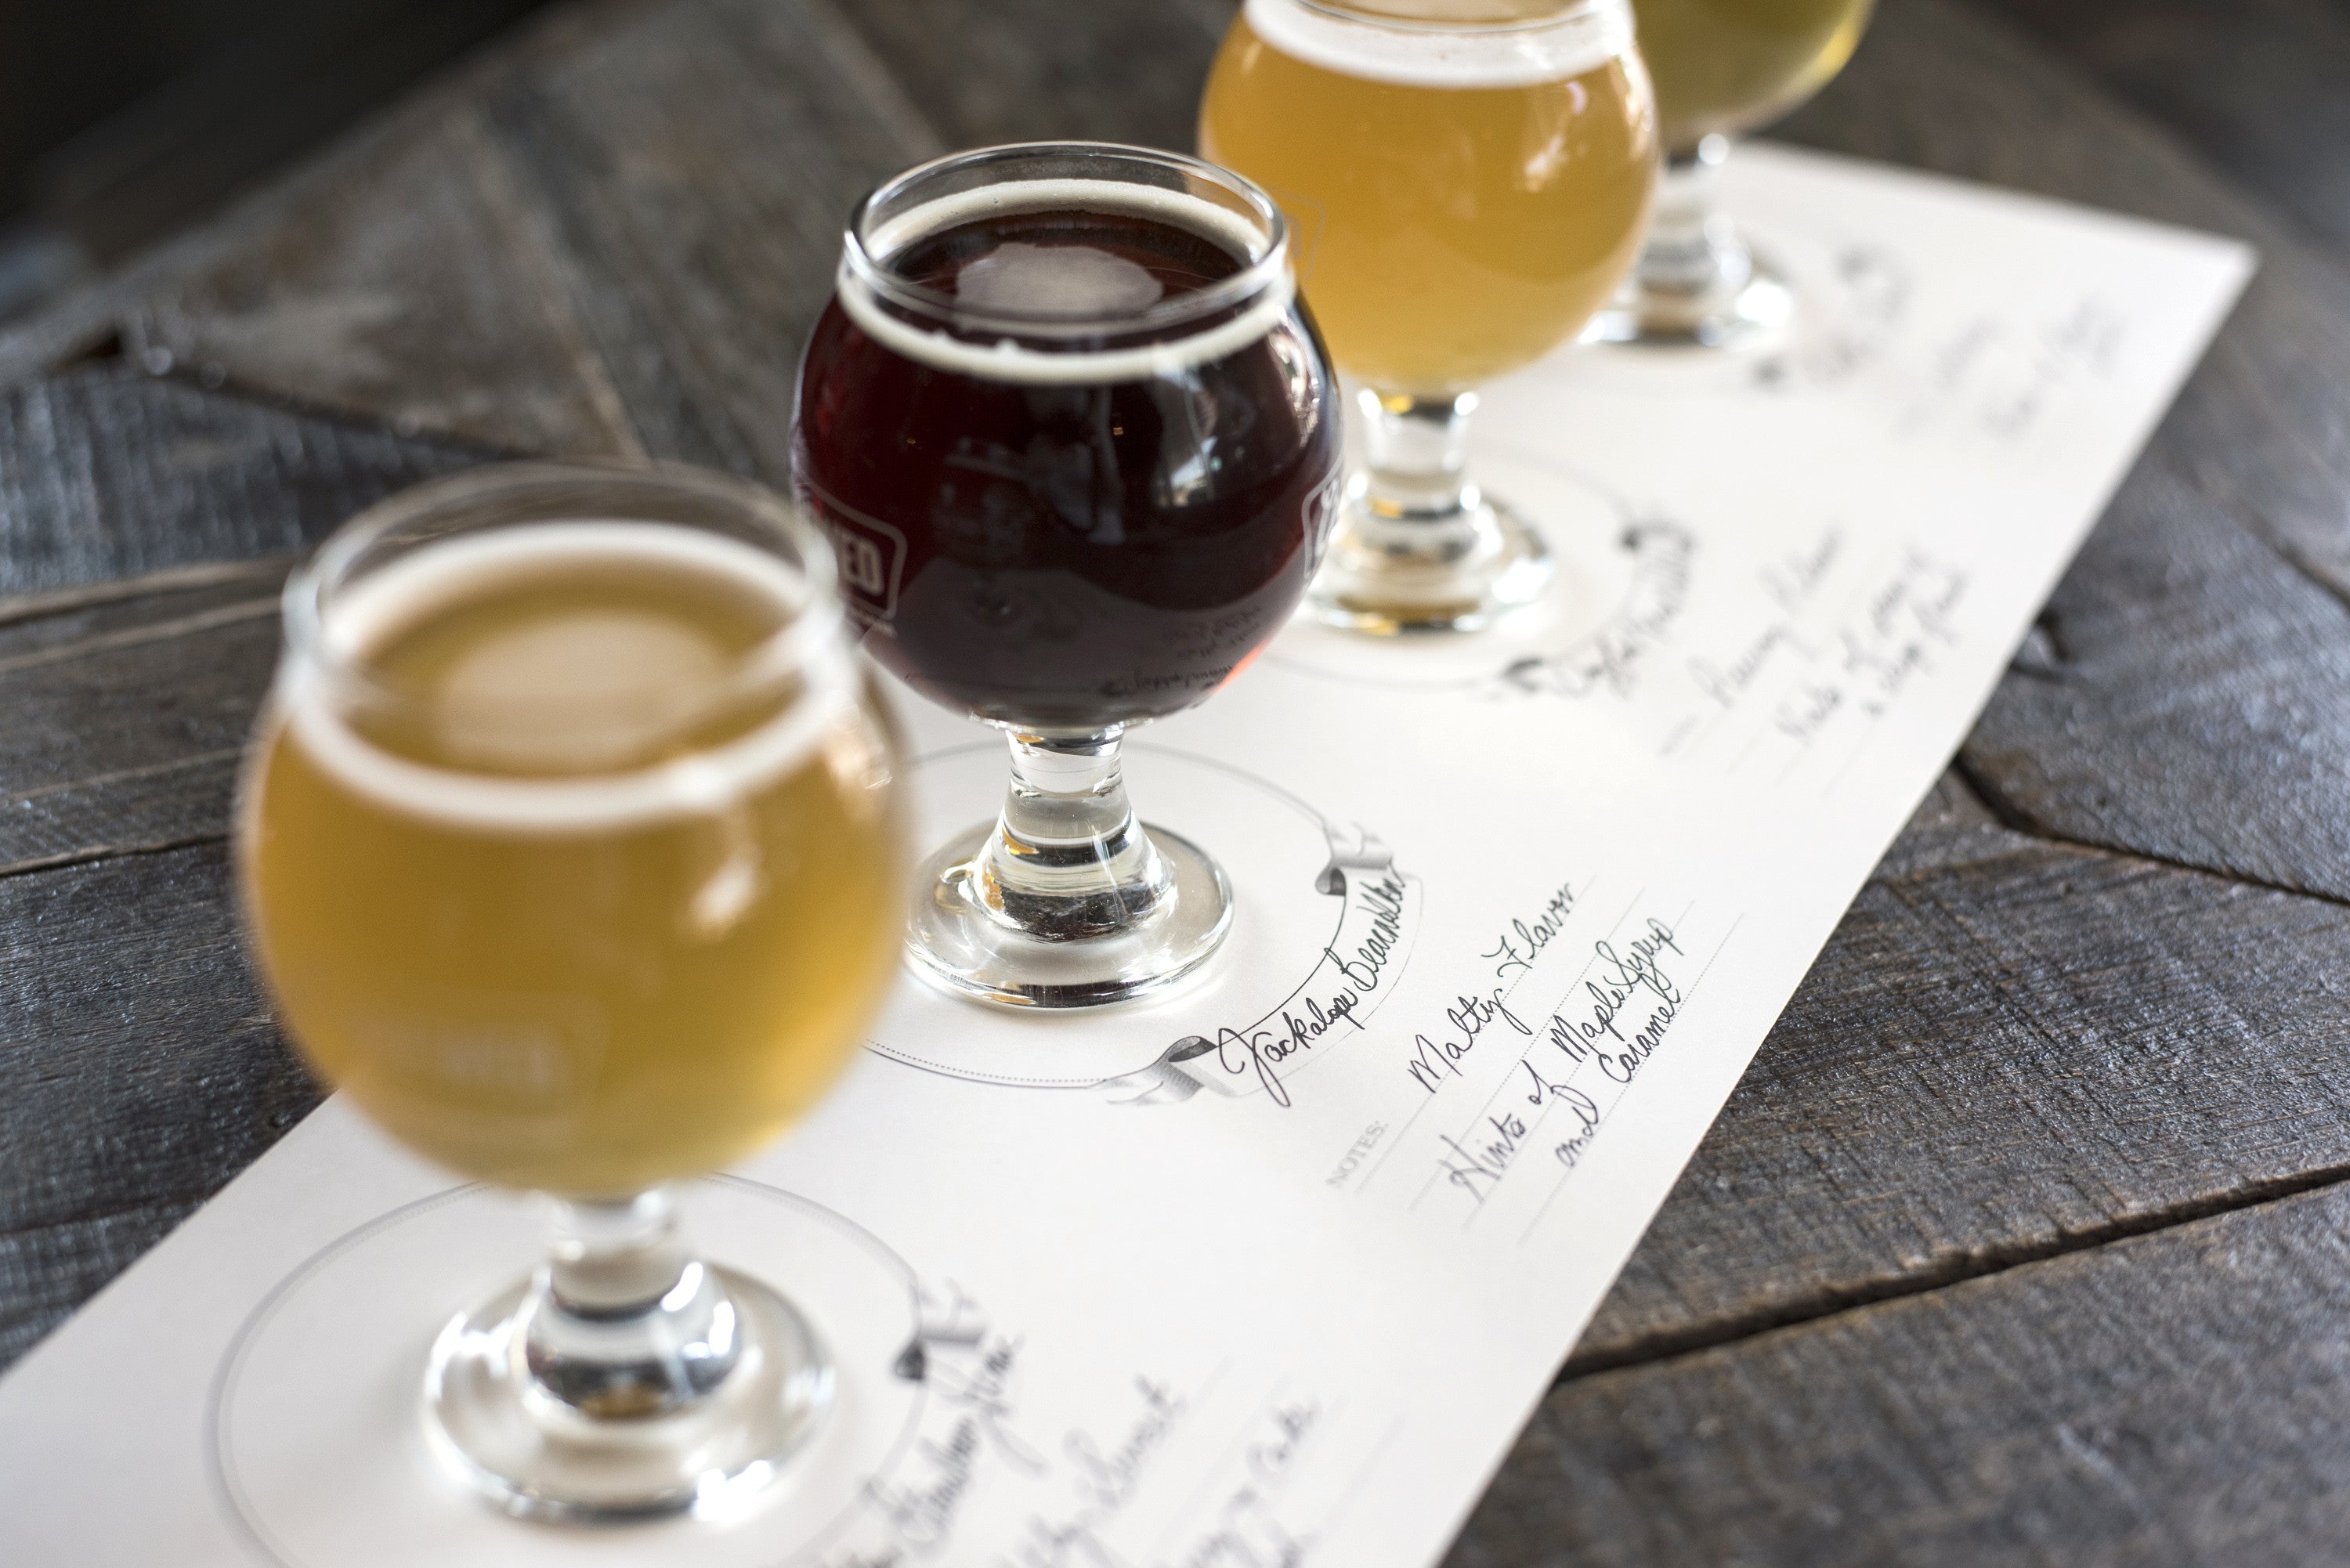 A flight of four different beers set out and labeled on the four spots of a Tasting Paper.